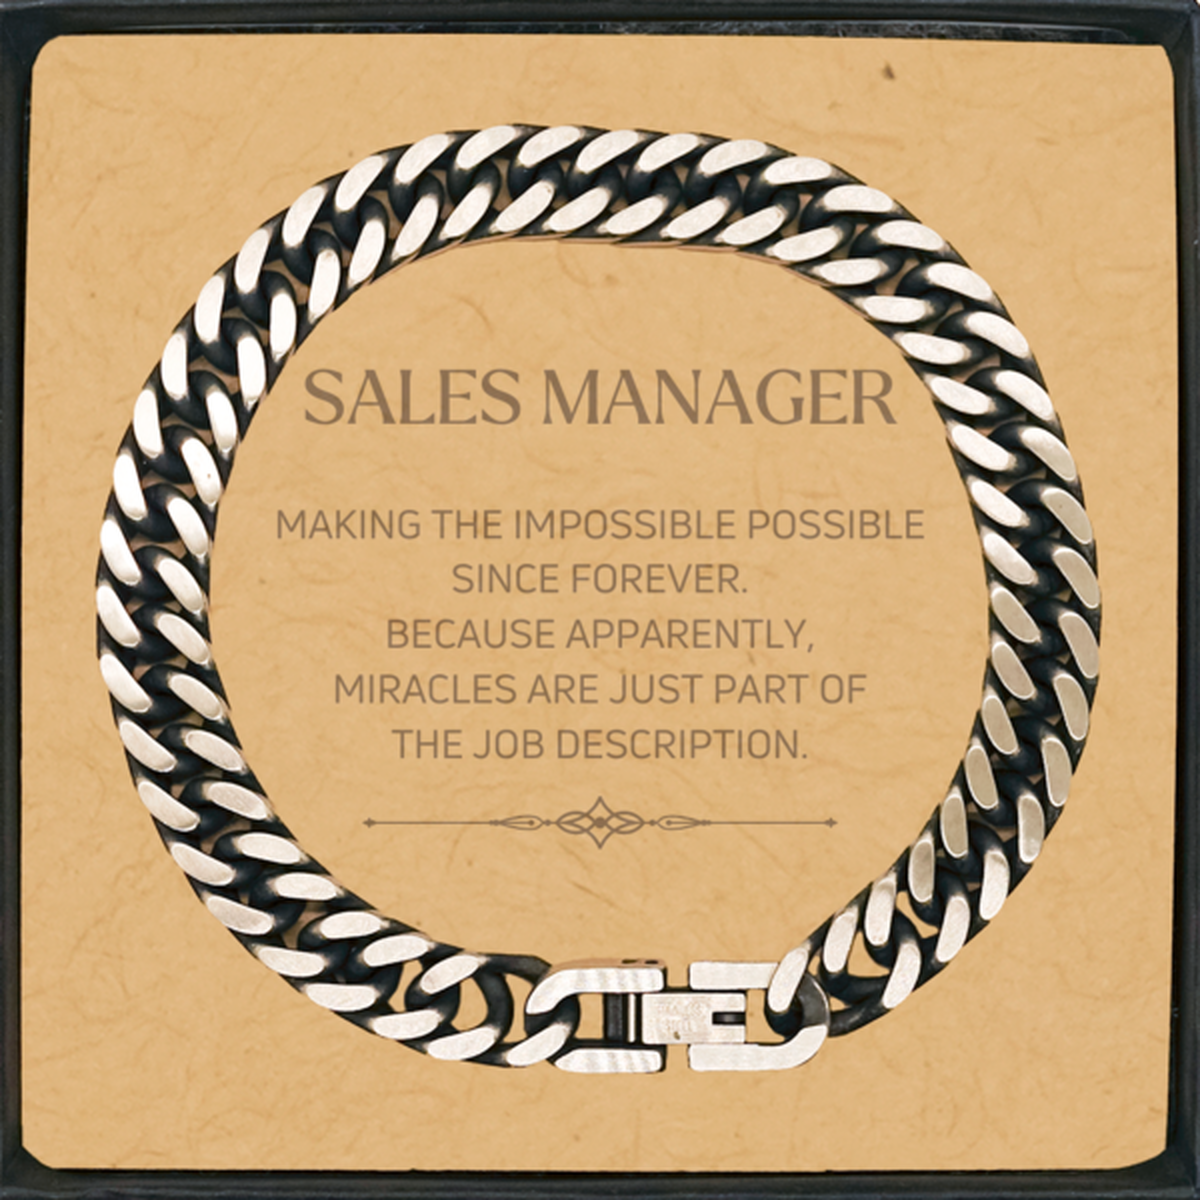 Funny Sales Manager Gifts, Miracles are just part of the job description, Inspirational Birthday Cuban Link Chain Bracelet For Sales Manager, Men, Women, Coworkers, Friends, Boss